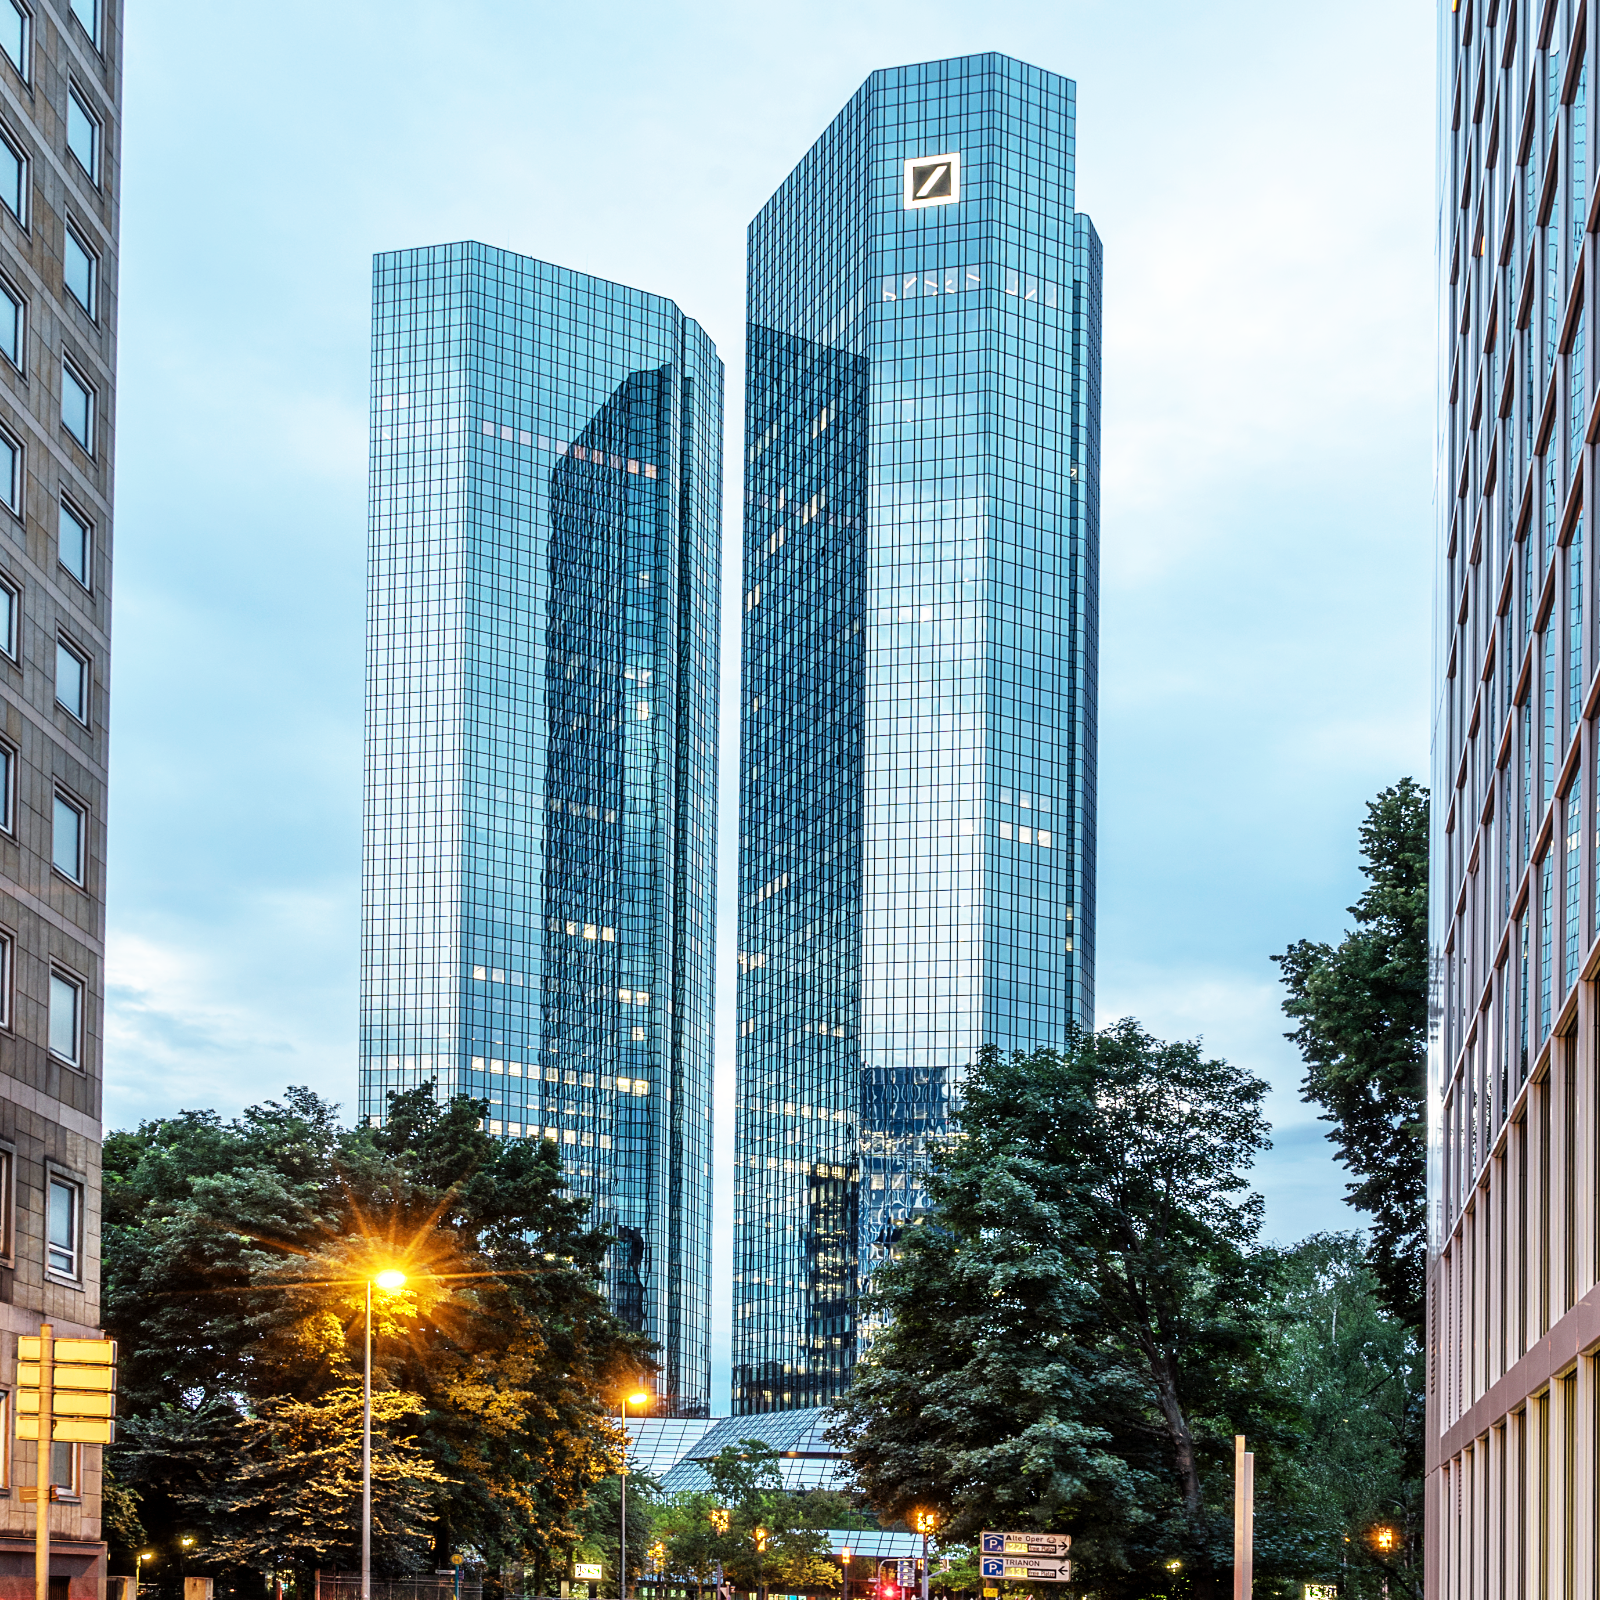 Deutsche Bank Headquarters Raided by 170 Police Officers Over Money Laundering